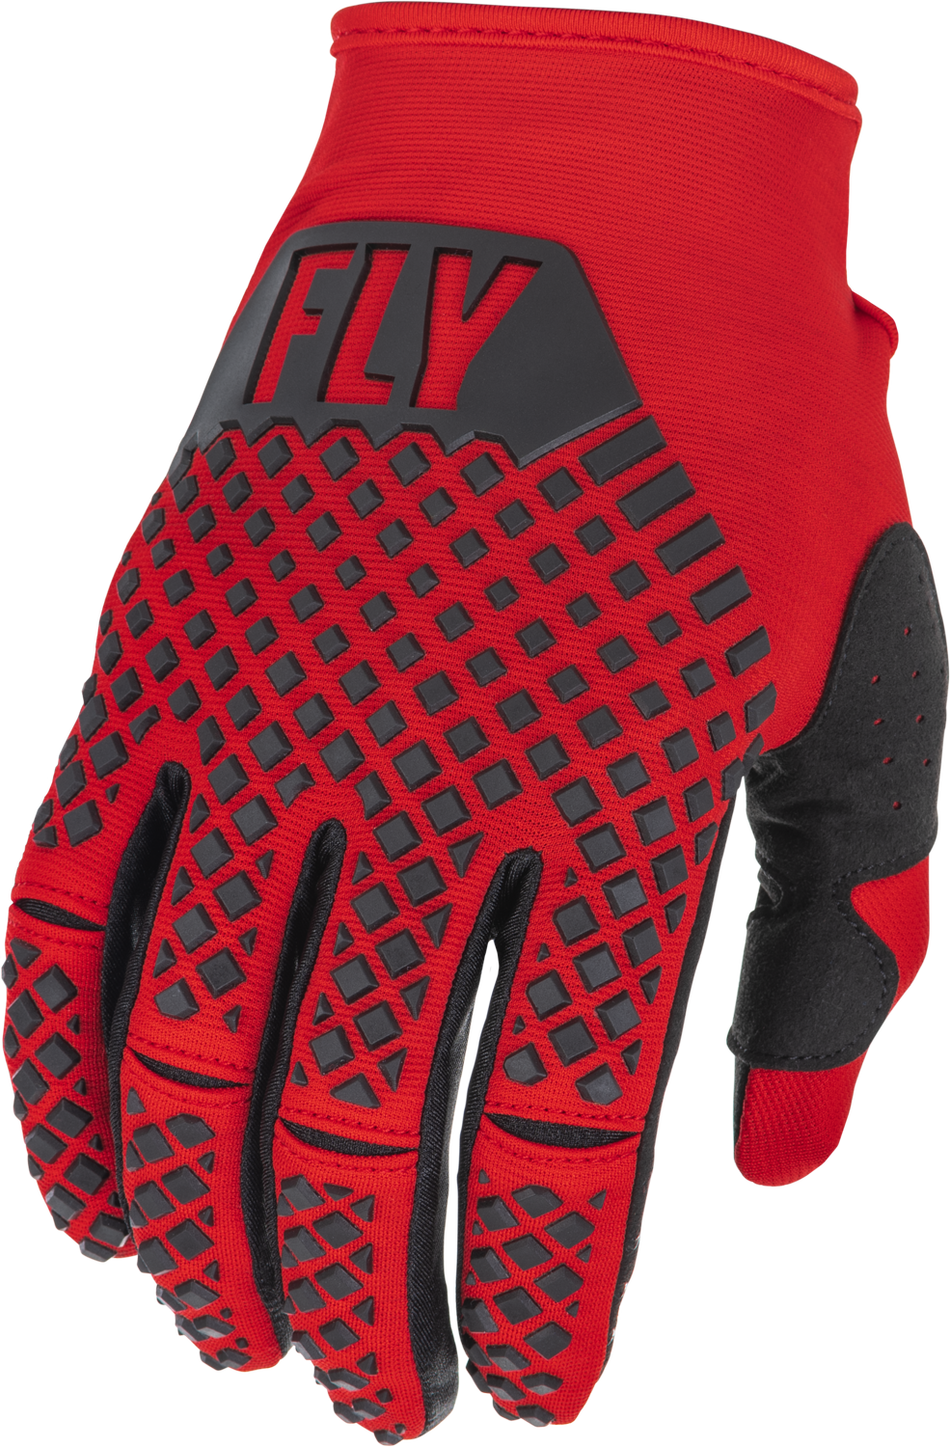 FLY RACING Kinetic Gloves Red/Black Sm 375-413S